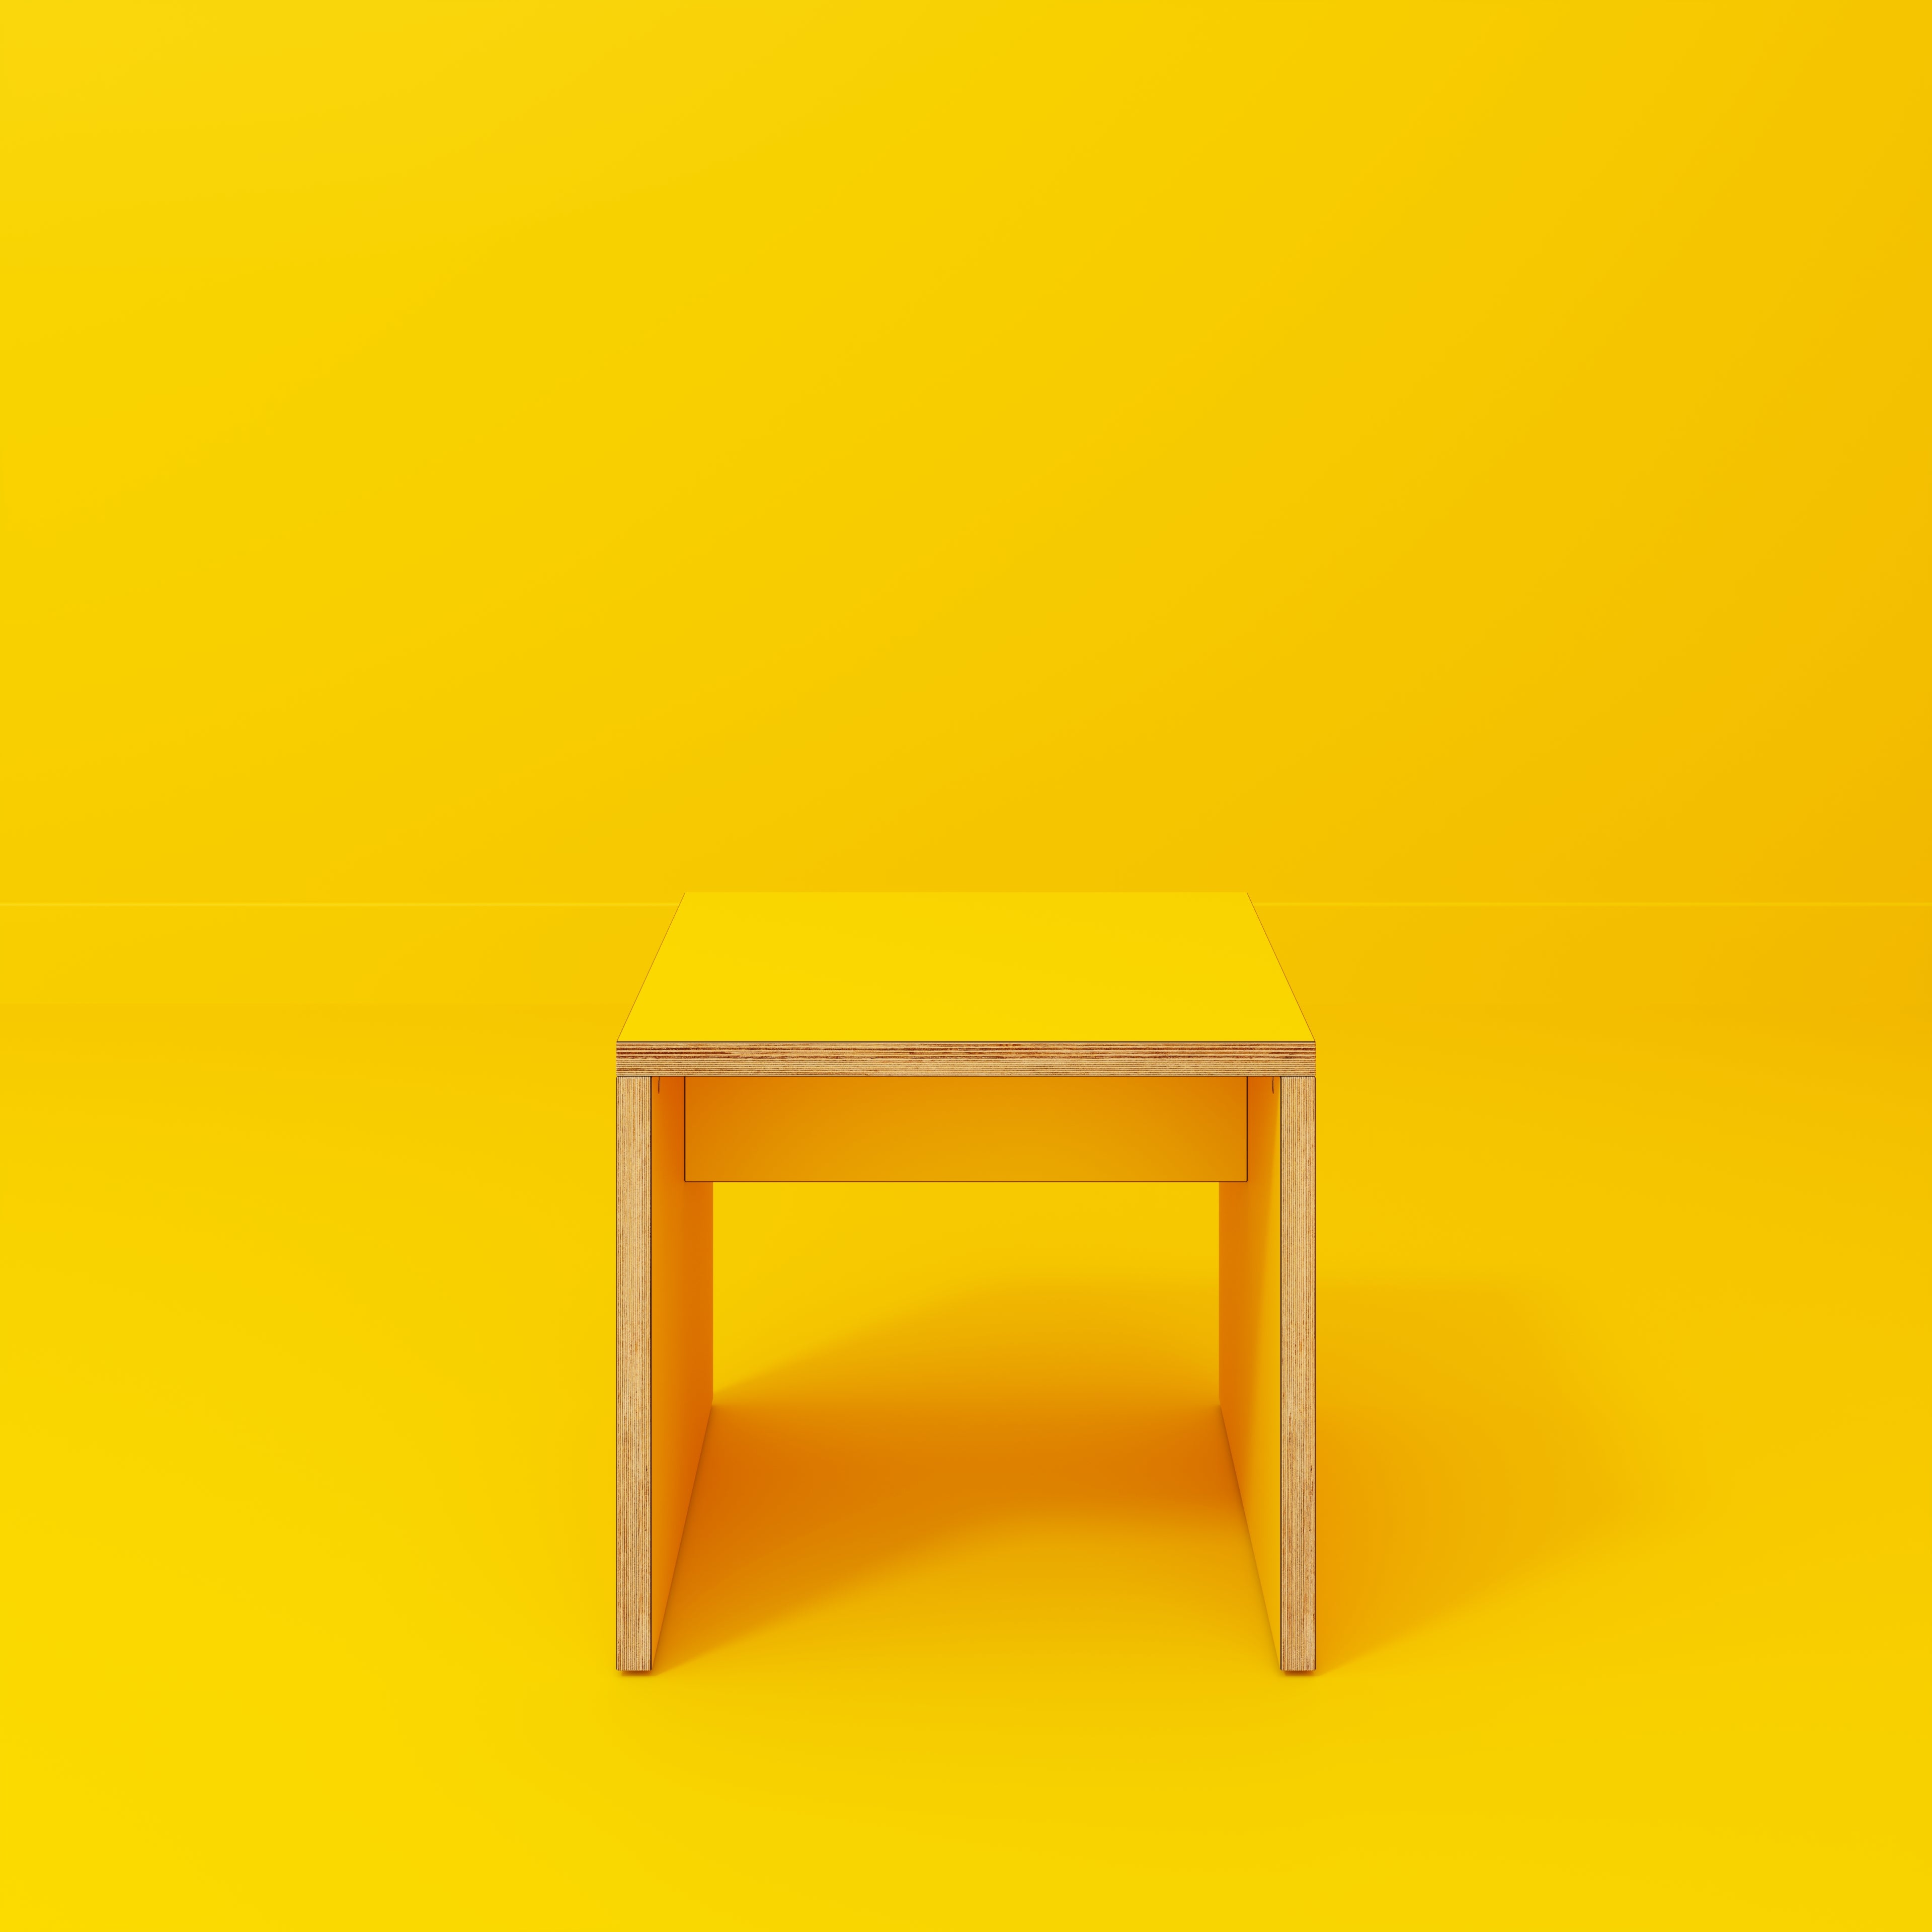 Side Table with Solid Sides - Formica Chrome Yellow - 500(w) x 500(d) x 450(h)